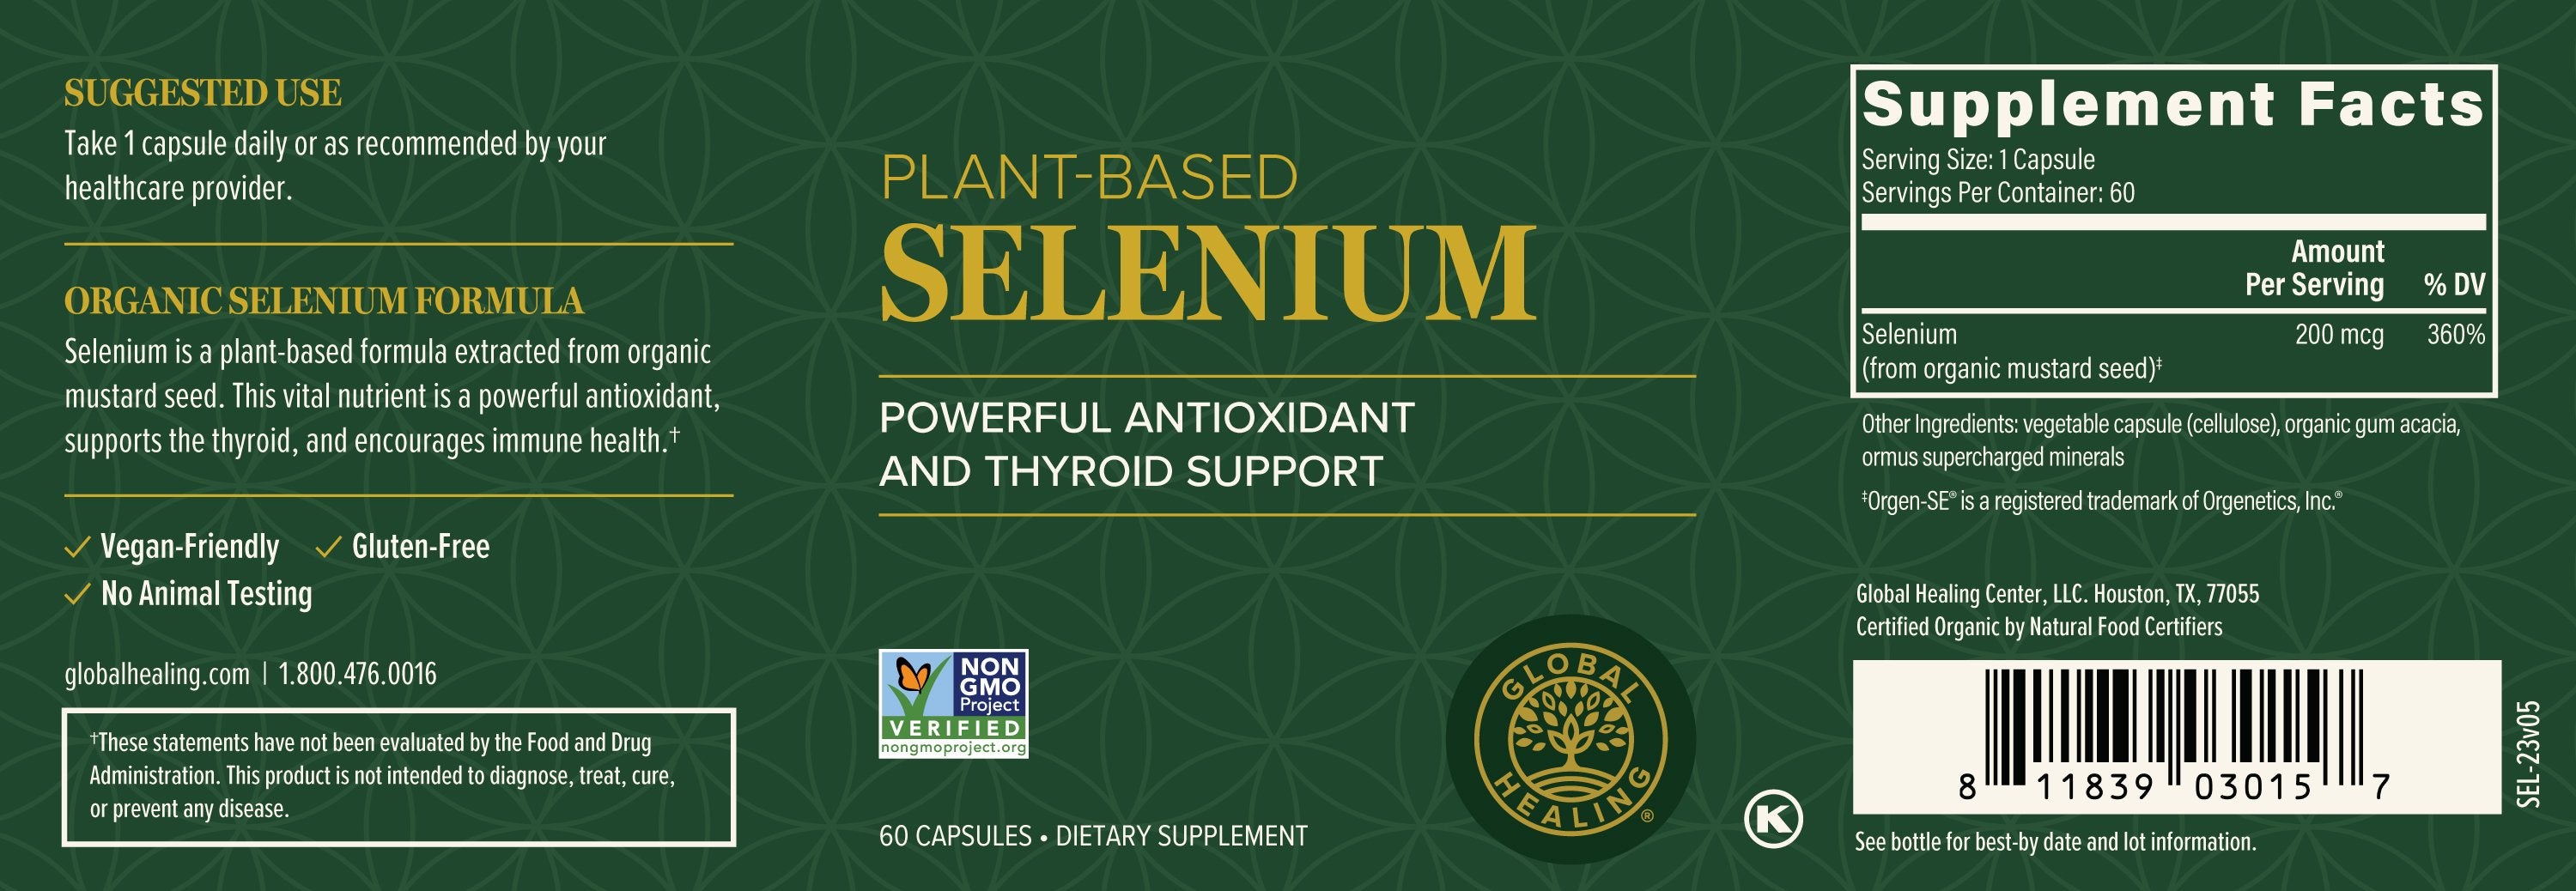 Vegan Selenium From Organic Mustard Seed label with global healing and thyroid support.